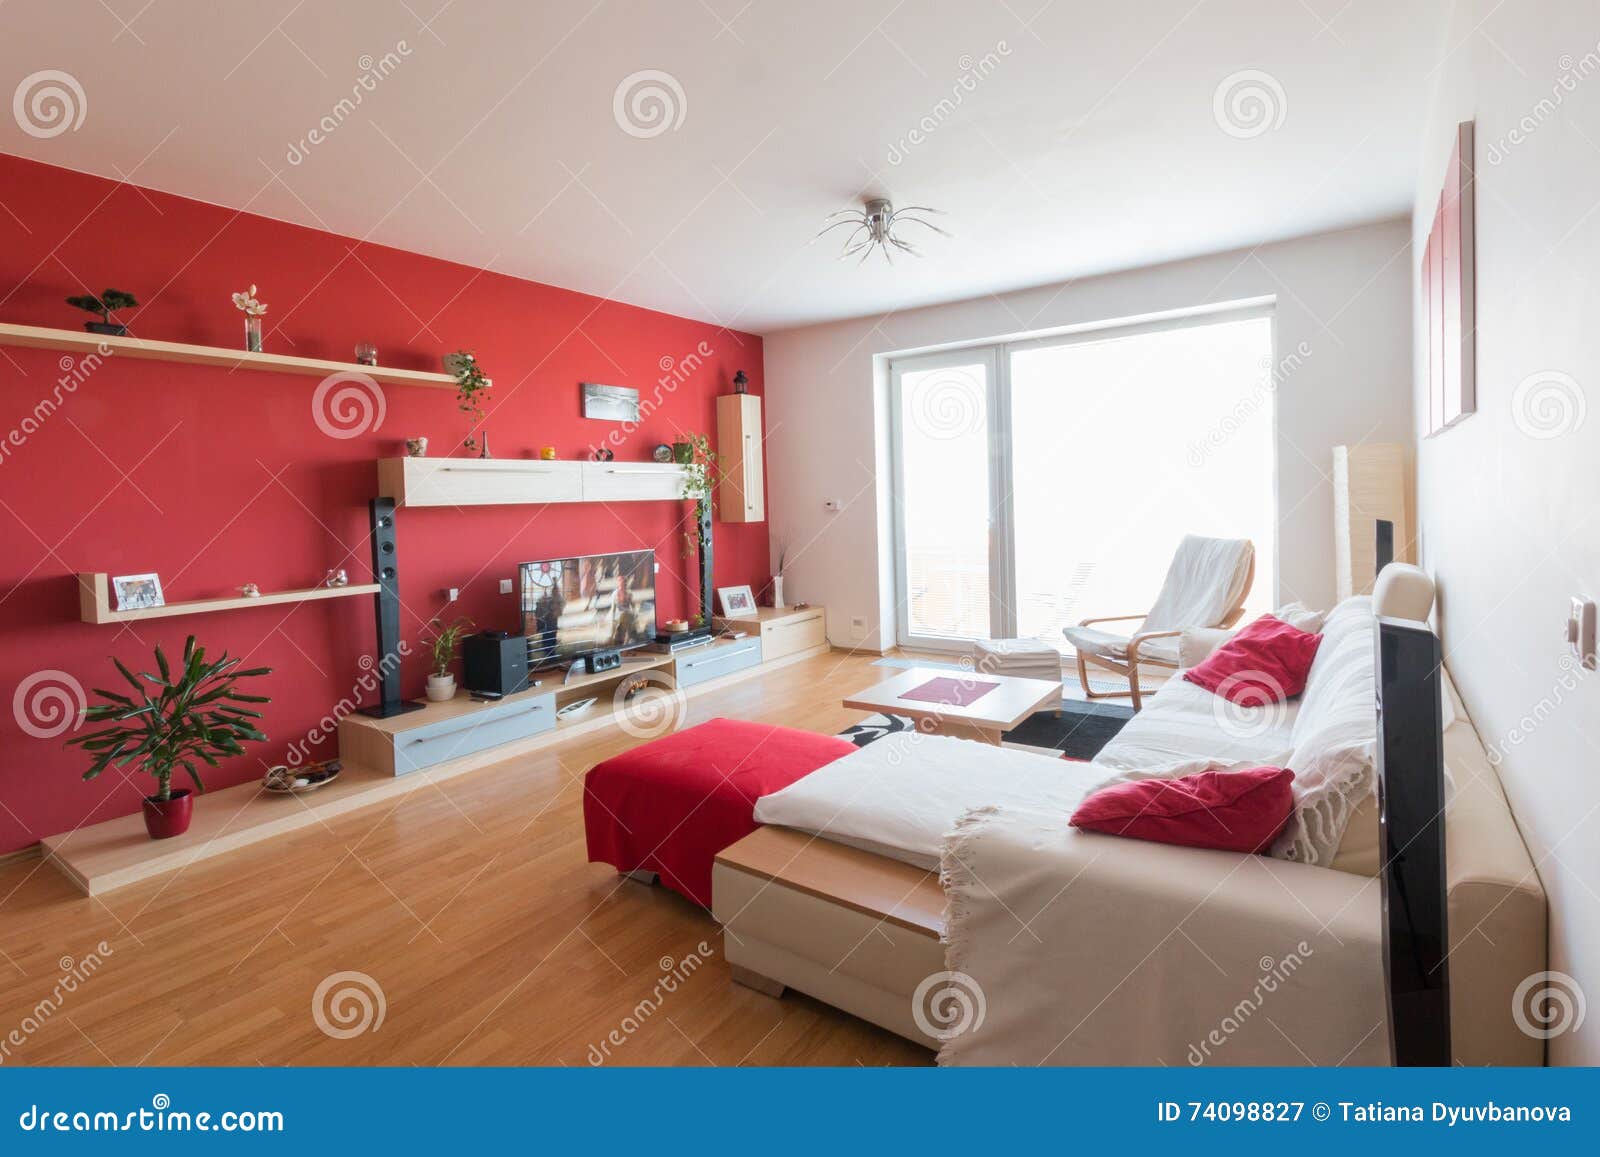 Interior Design In Red White And Black Colors Stock Image